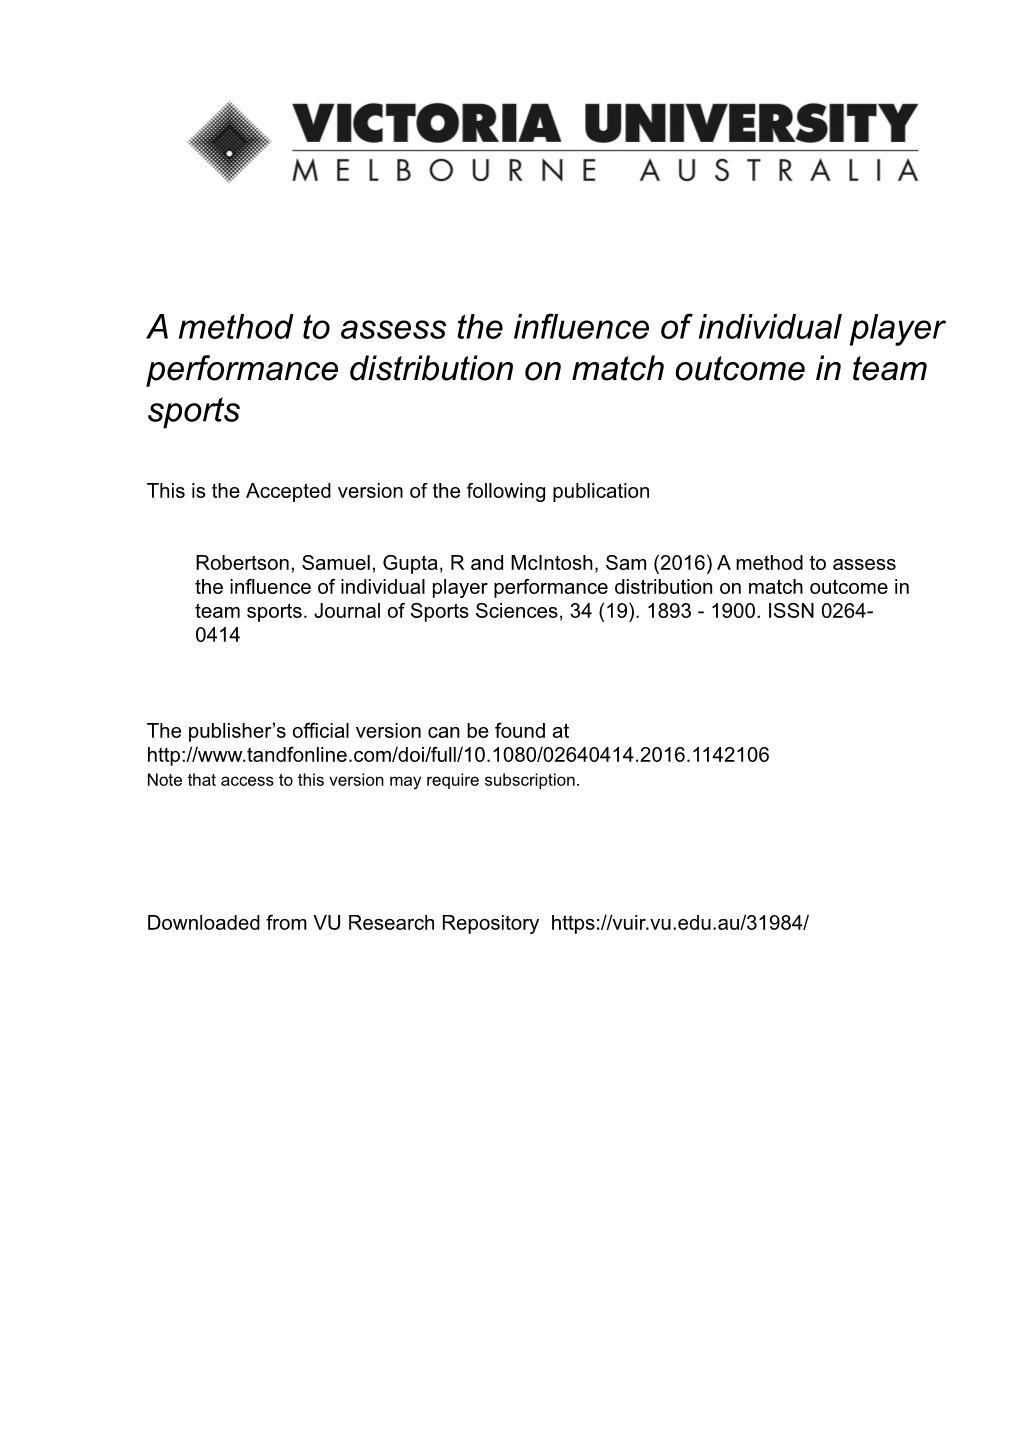 A Method to Assess the Influence of Individual Player Performance Distribution on Match Outcome in Team Sports